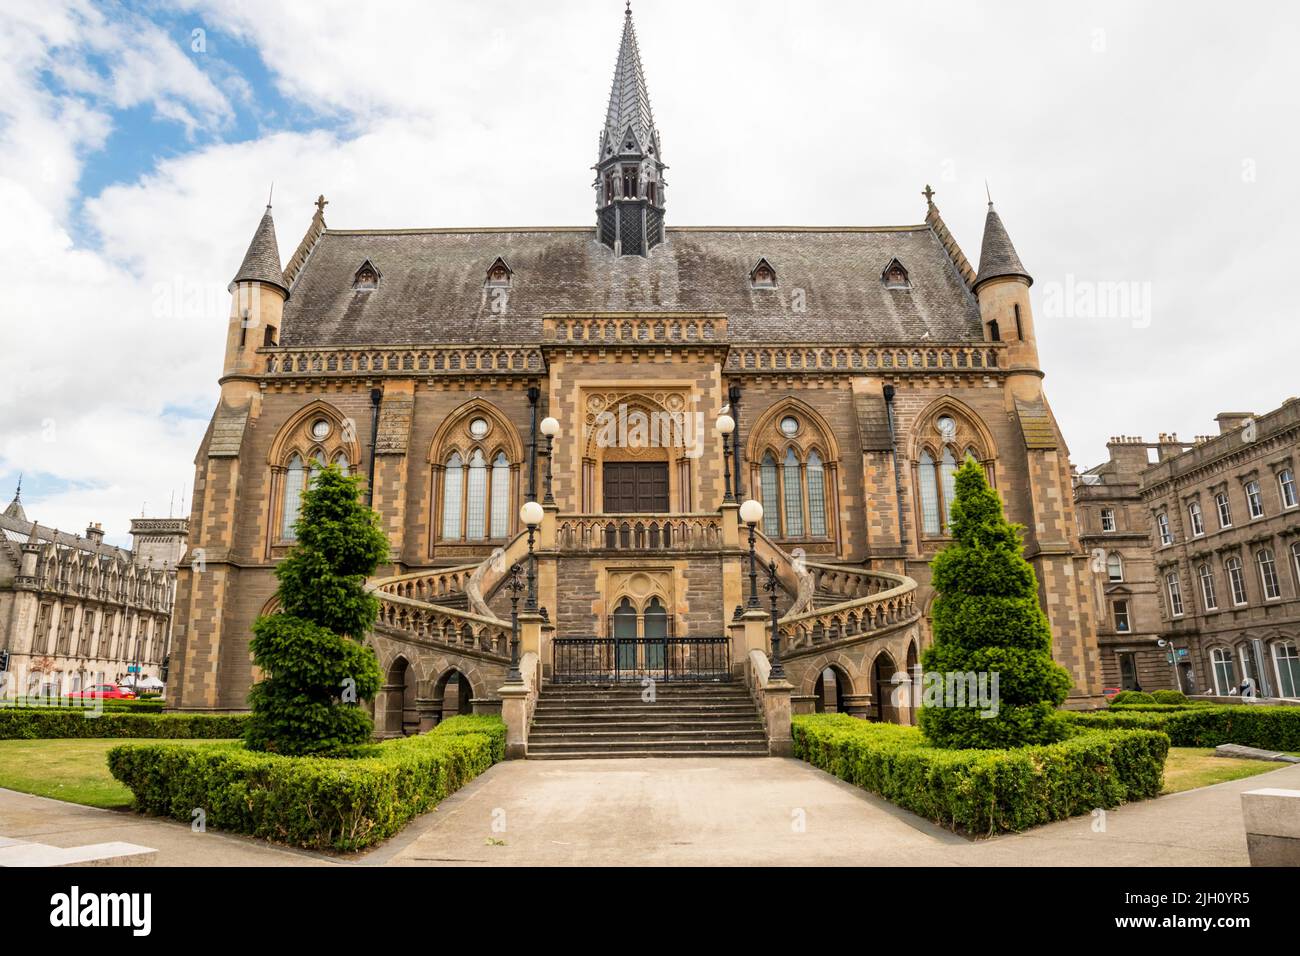 The McManus: Dundee's Art Gallery and Museum, was designed by George Gilbert Scott. Stock Photo